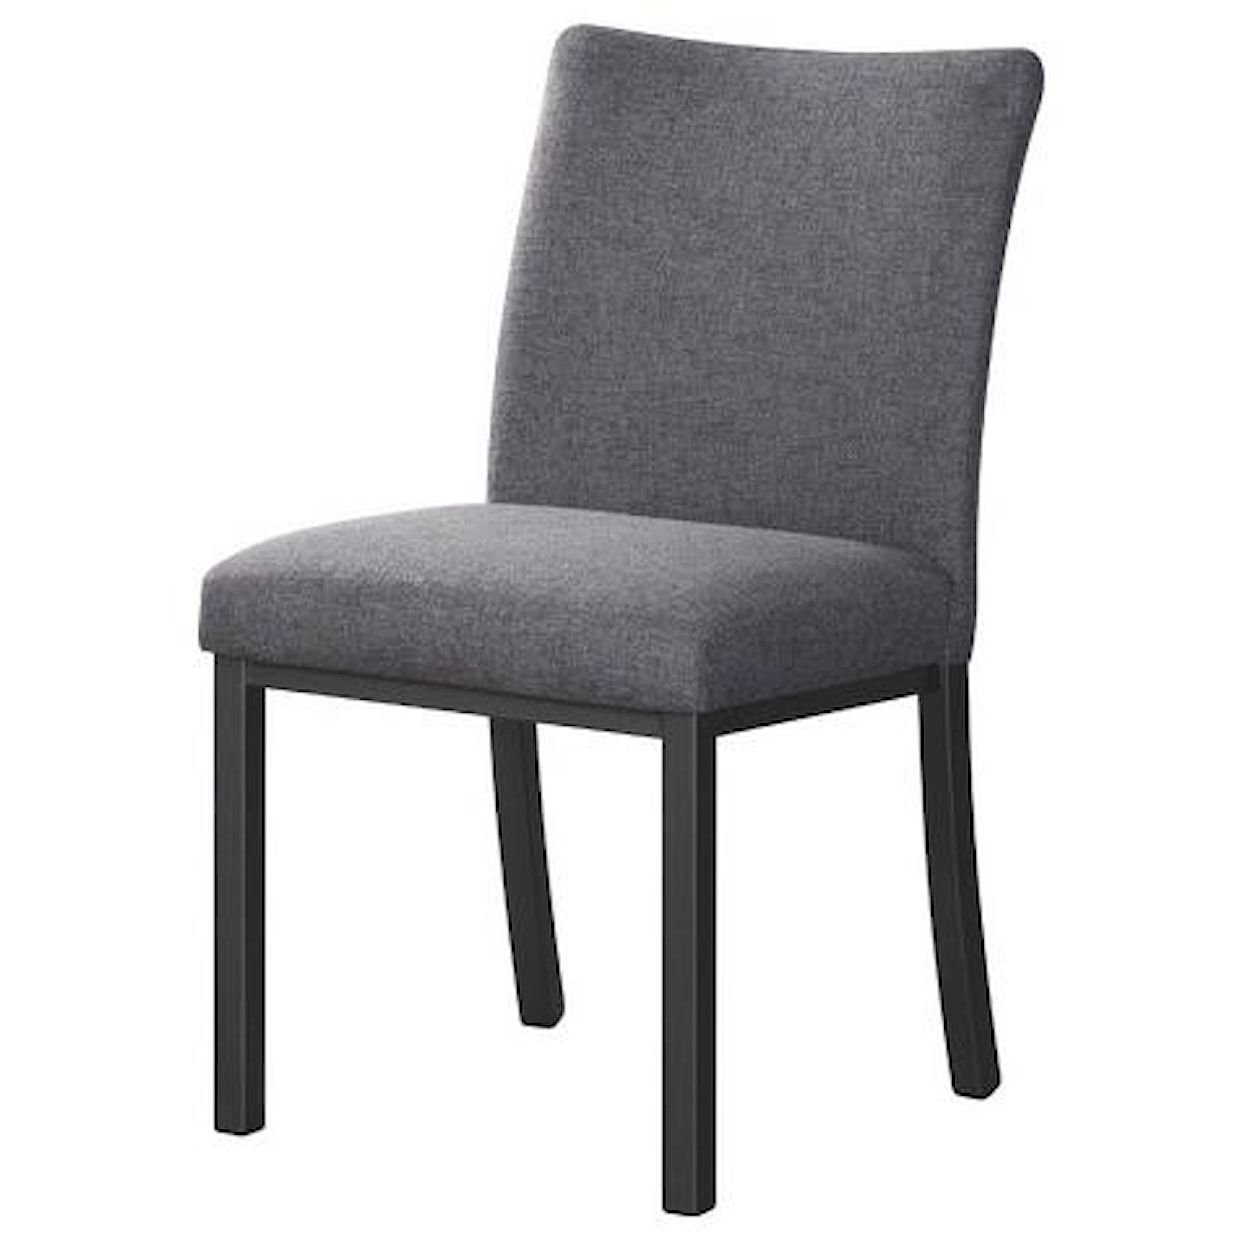 Trica Contemporary Seating Biscaro Side Chair